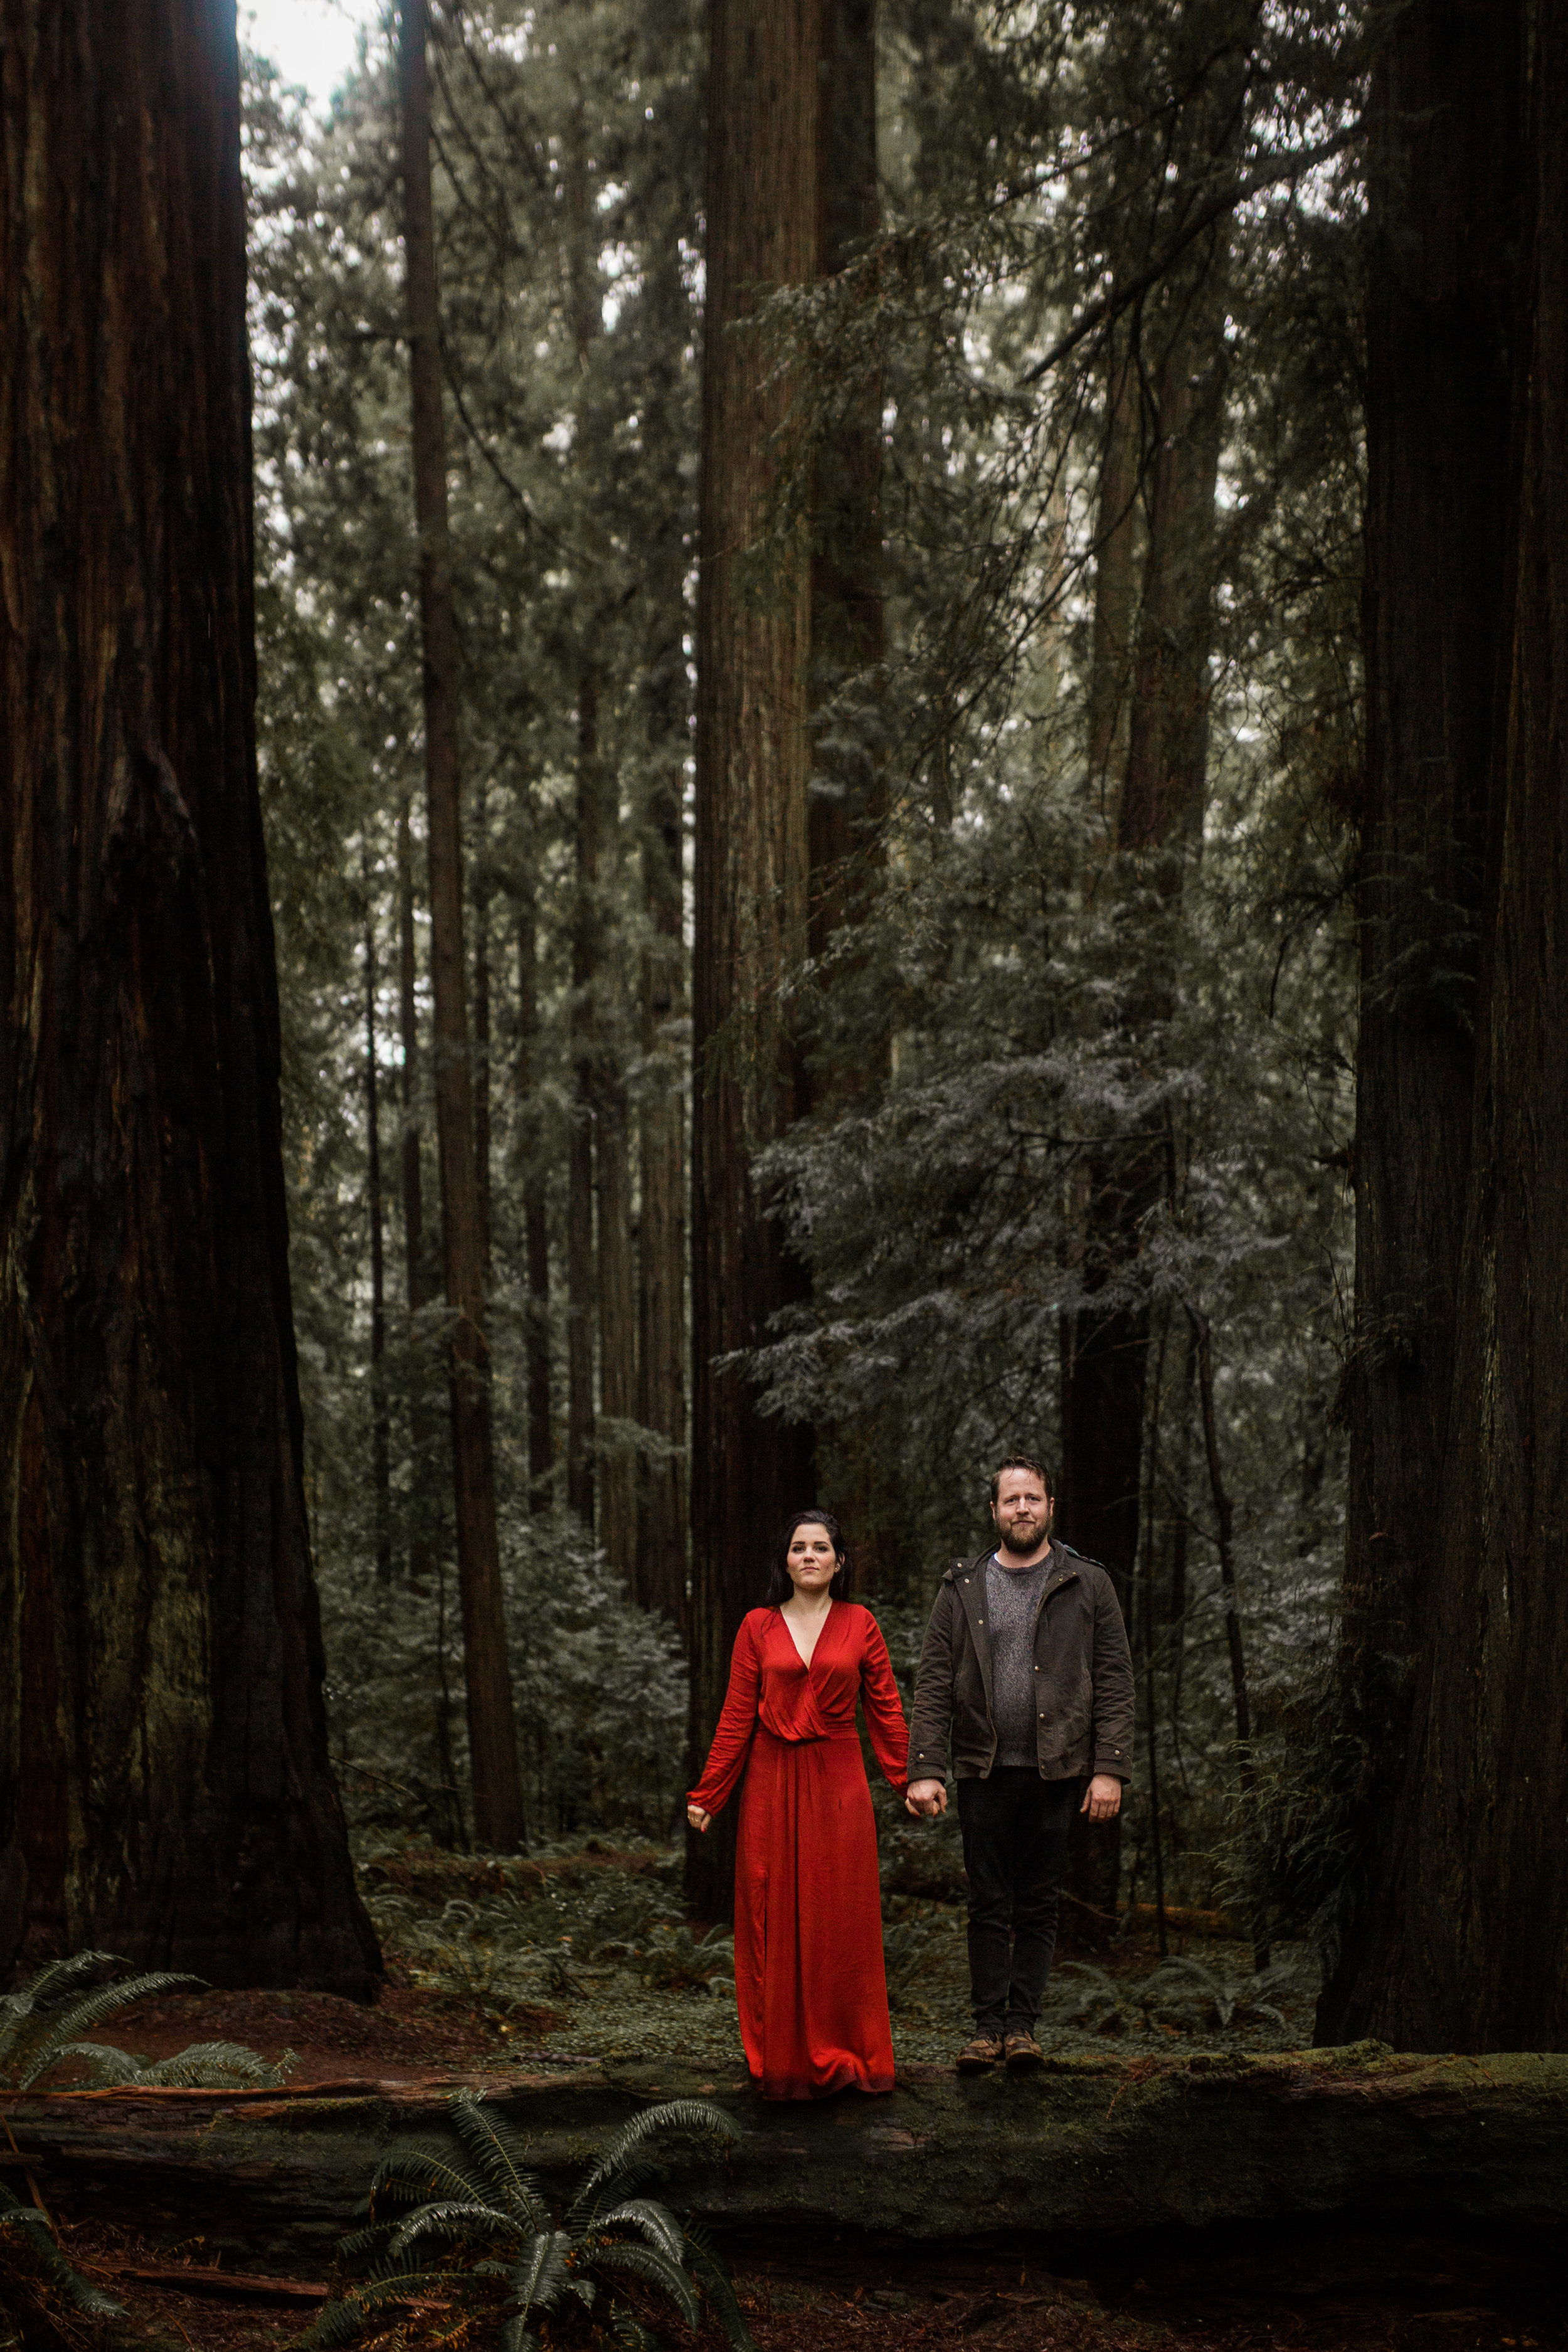 nicole-daacke-photography-redwoods-national-park-forest-rainy-foggy-adventure-engagement-session-humboldt-county-old-growth-redwood-tree-elopement-intimate-wedding-photographer-53.jpg